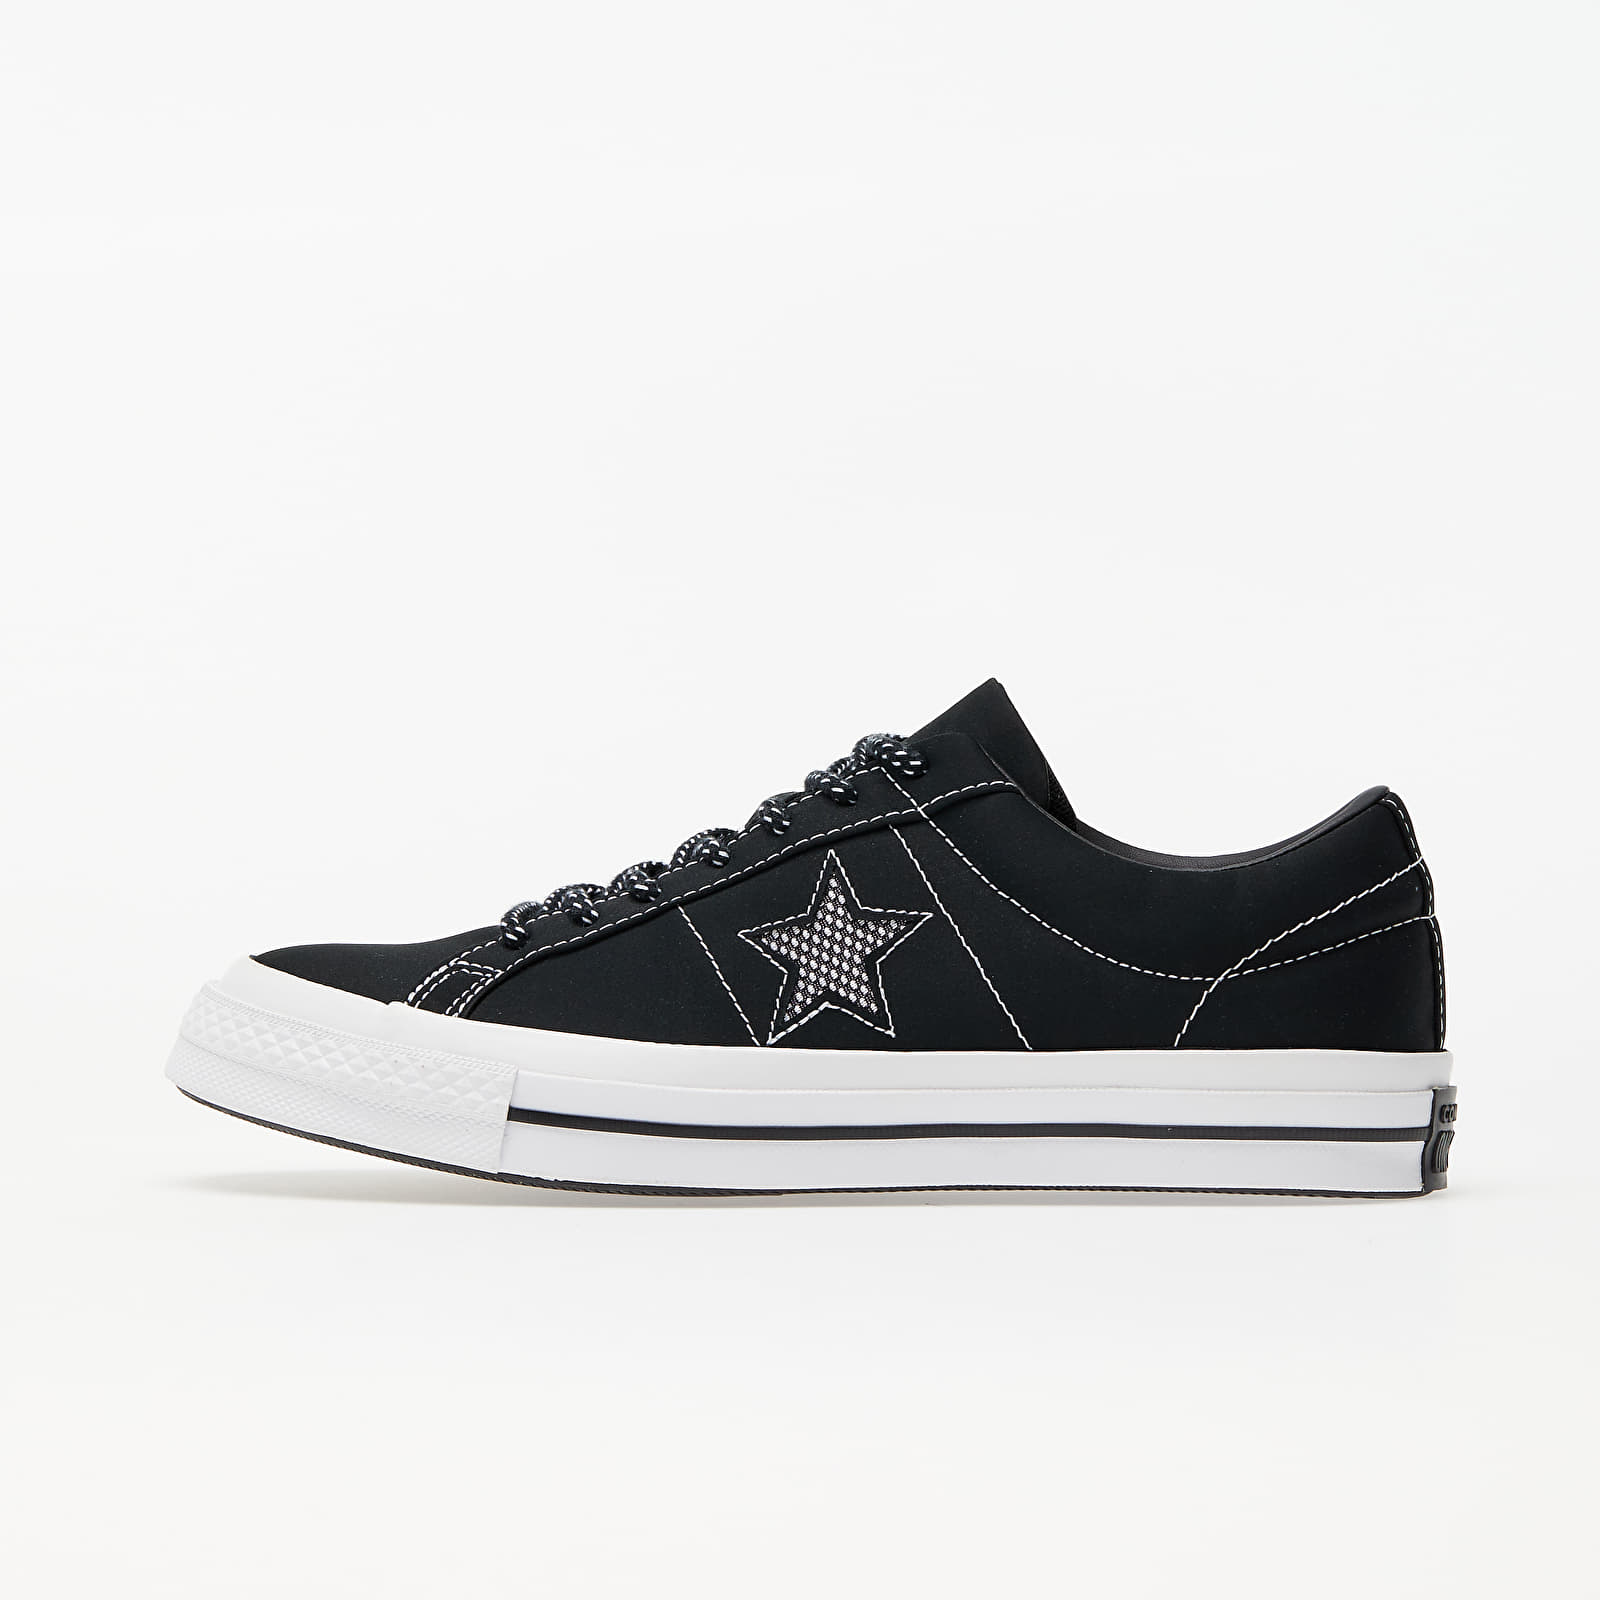 Men's shoes Converse One Star OX Black